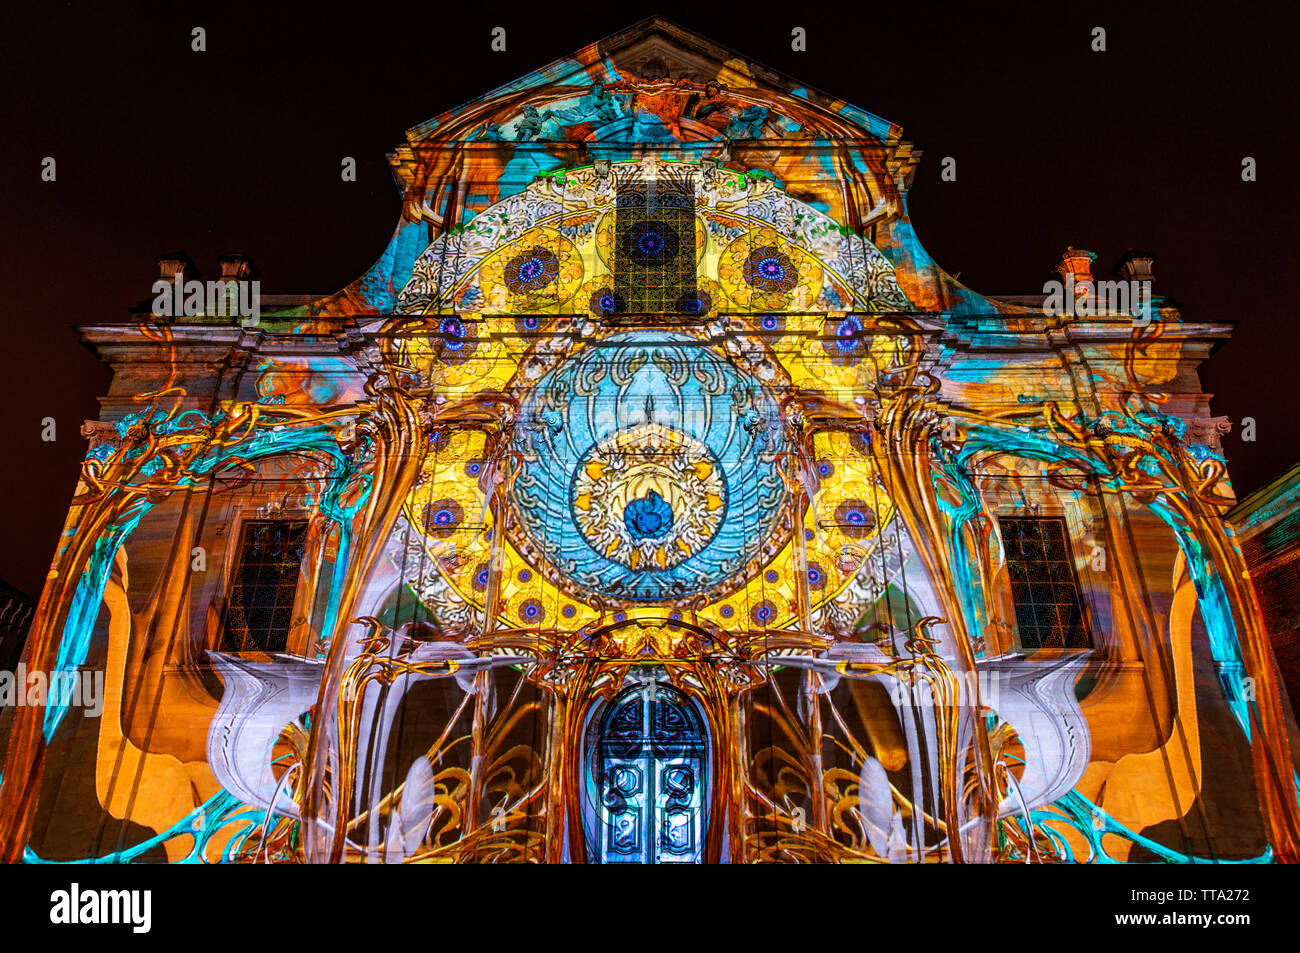 The baroque style facade of the Saint Peter's Abbey illuminated with colourful lights during the Ghent light festival (Gent in Flemish), Belgium. Stock Photo